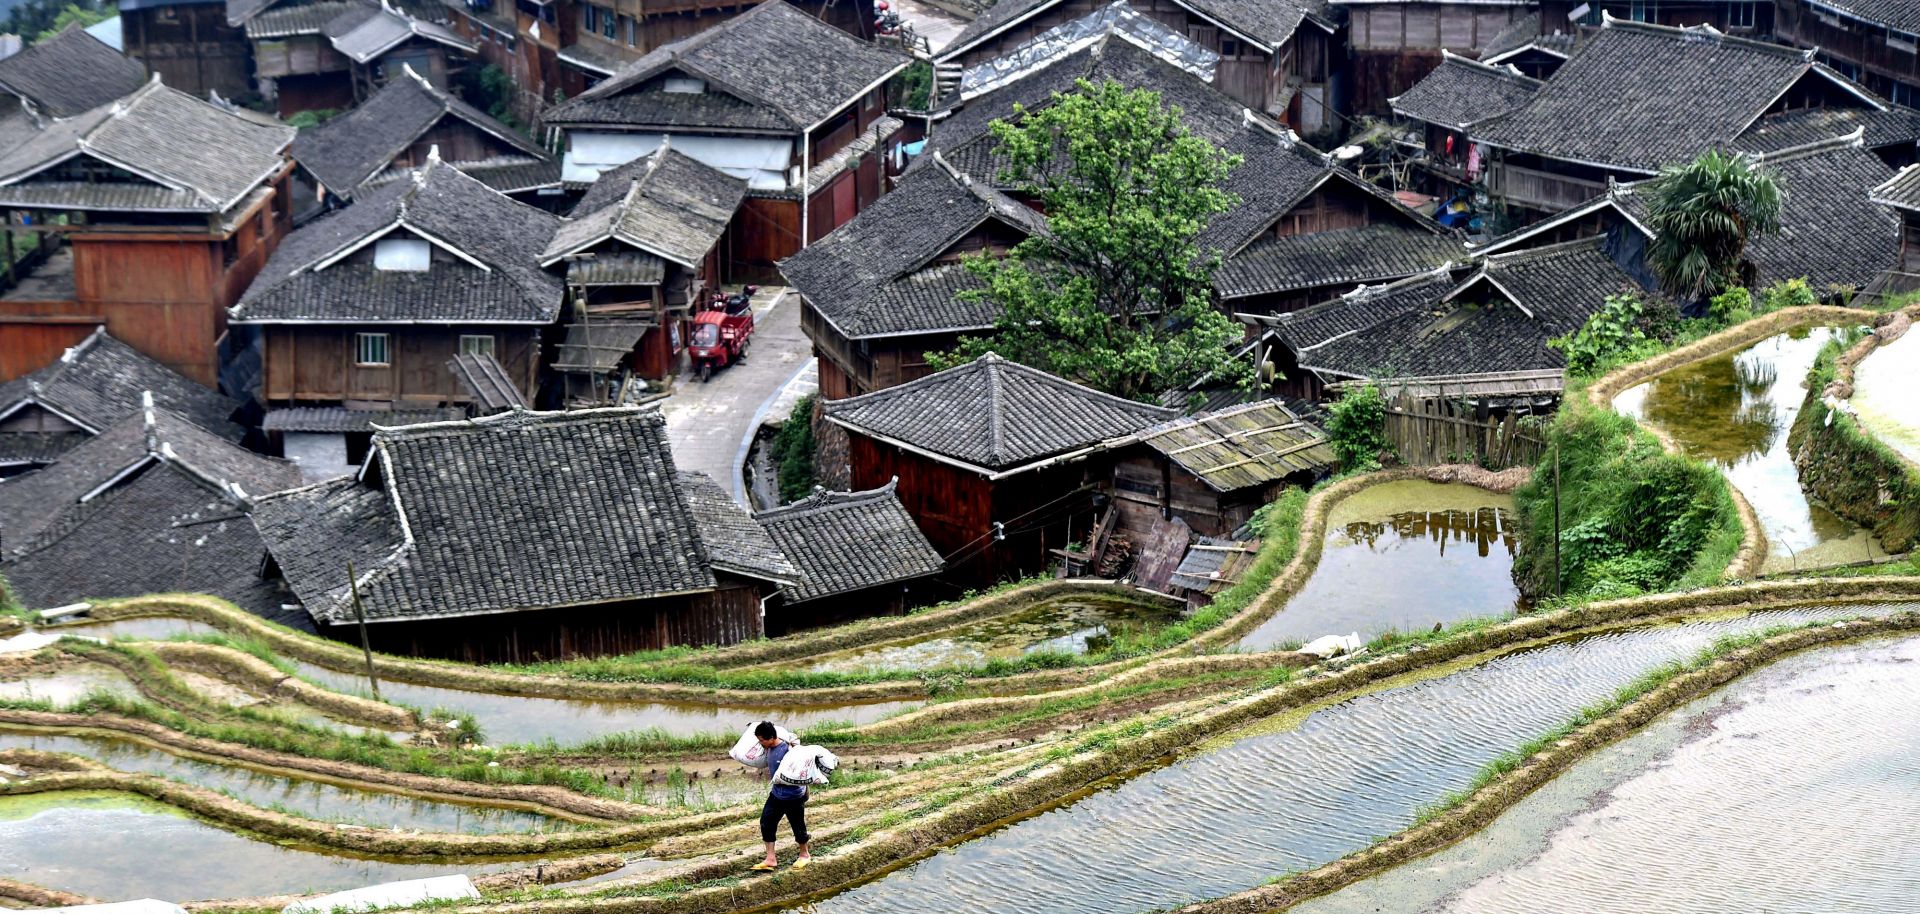 A farmer walks along rice paddy fields in Congjiang, a city located in China's southwestern Guizhou province, on April 24, 2021. 